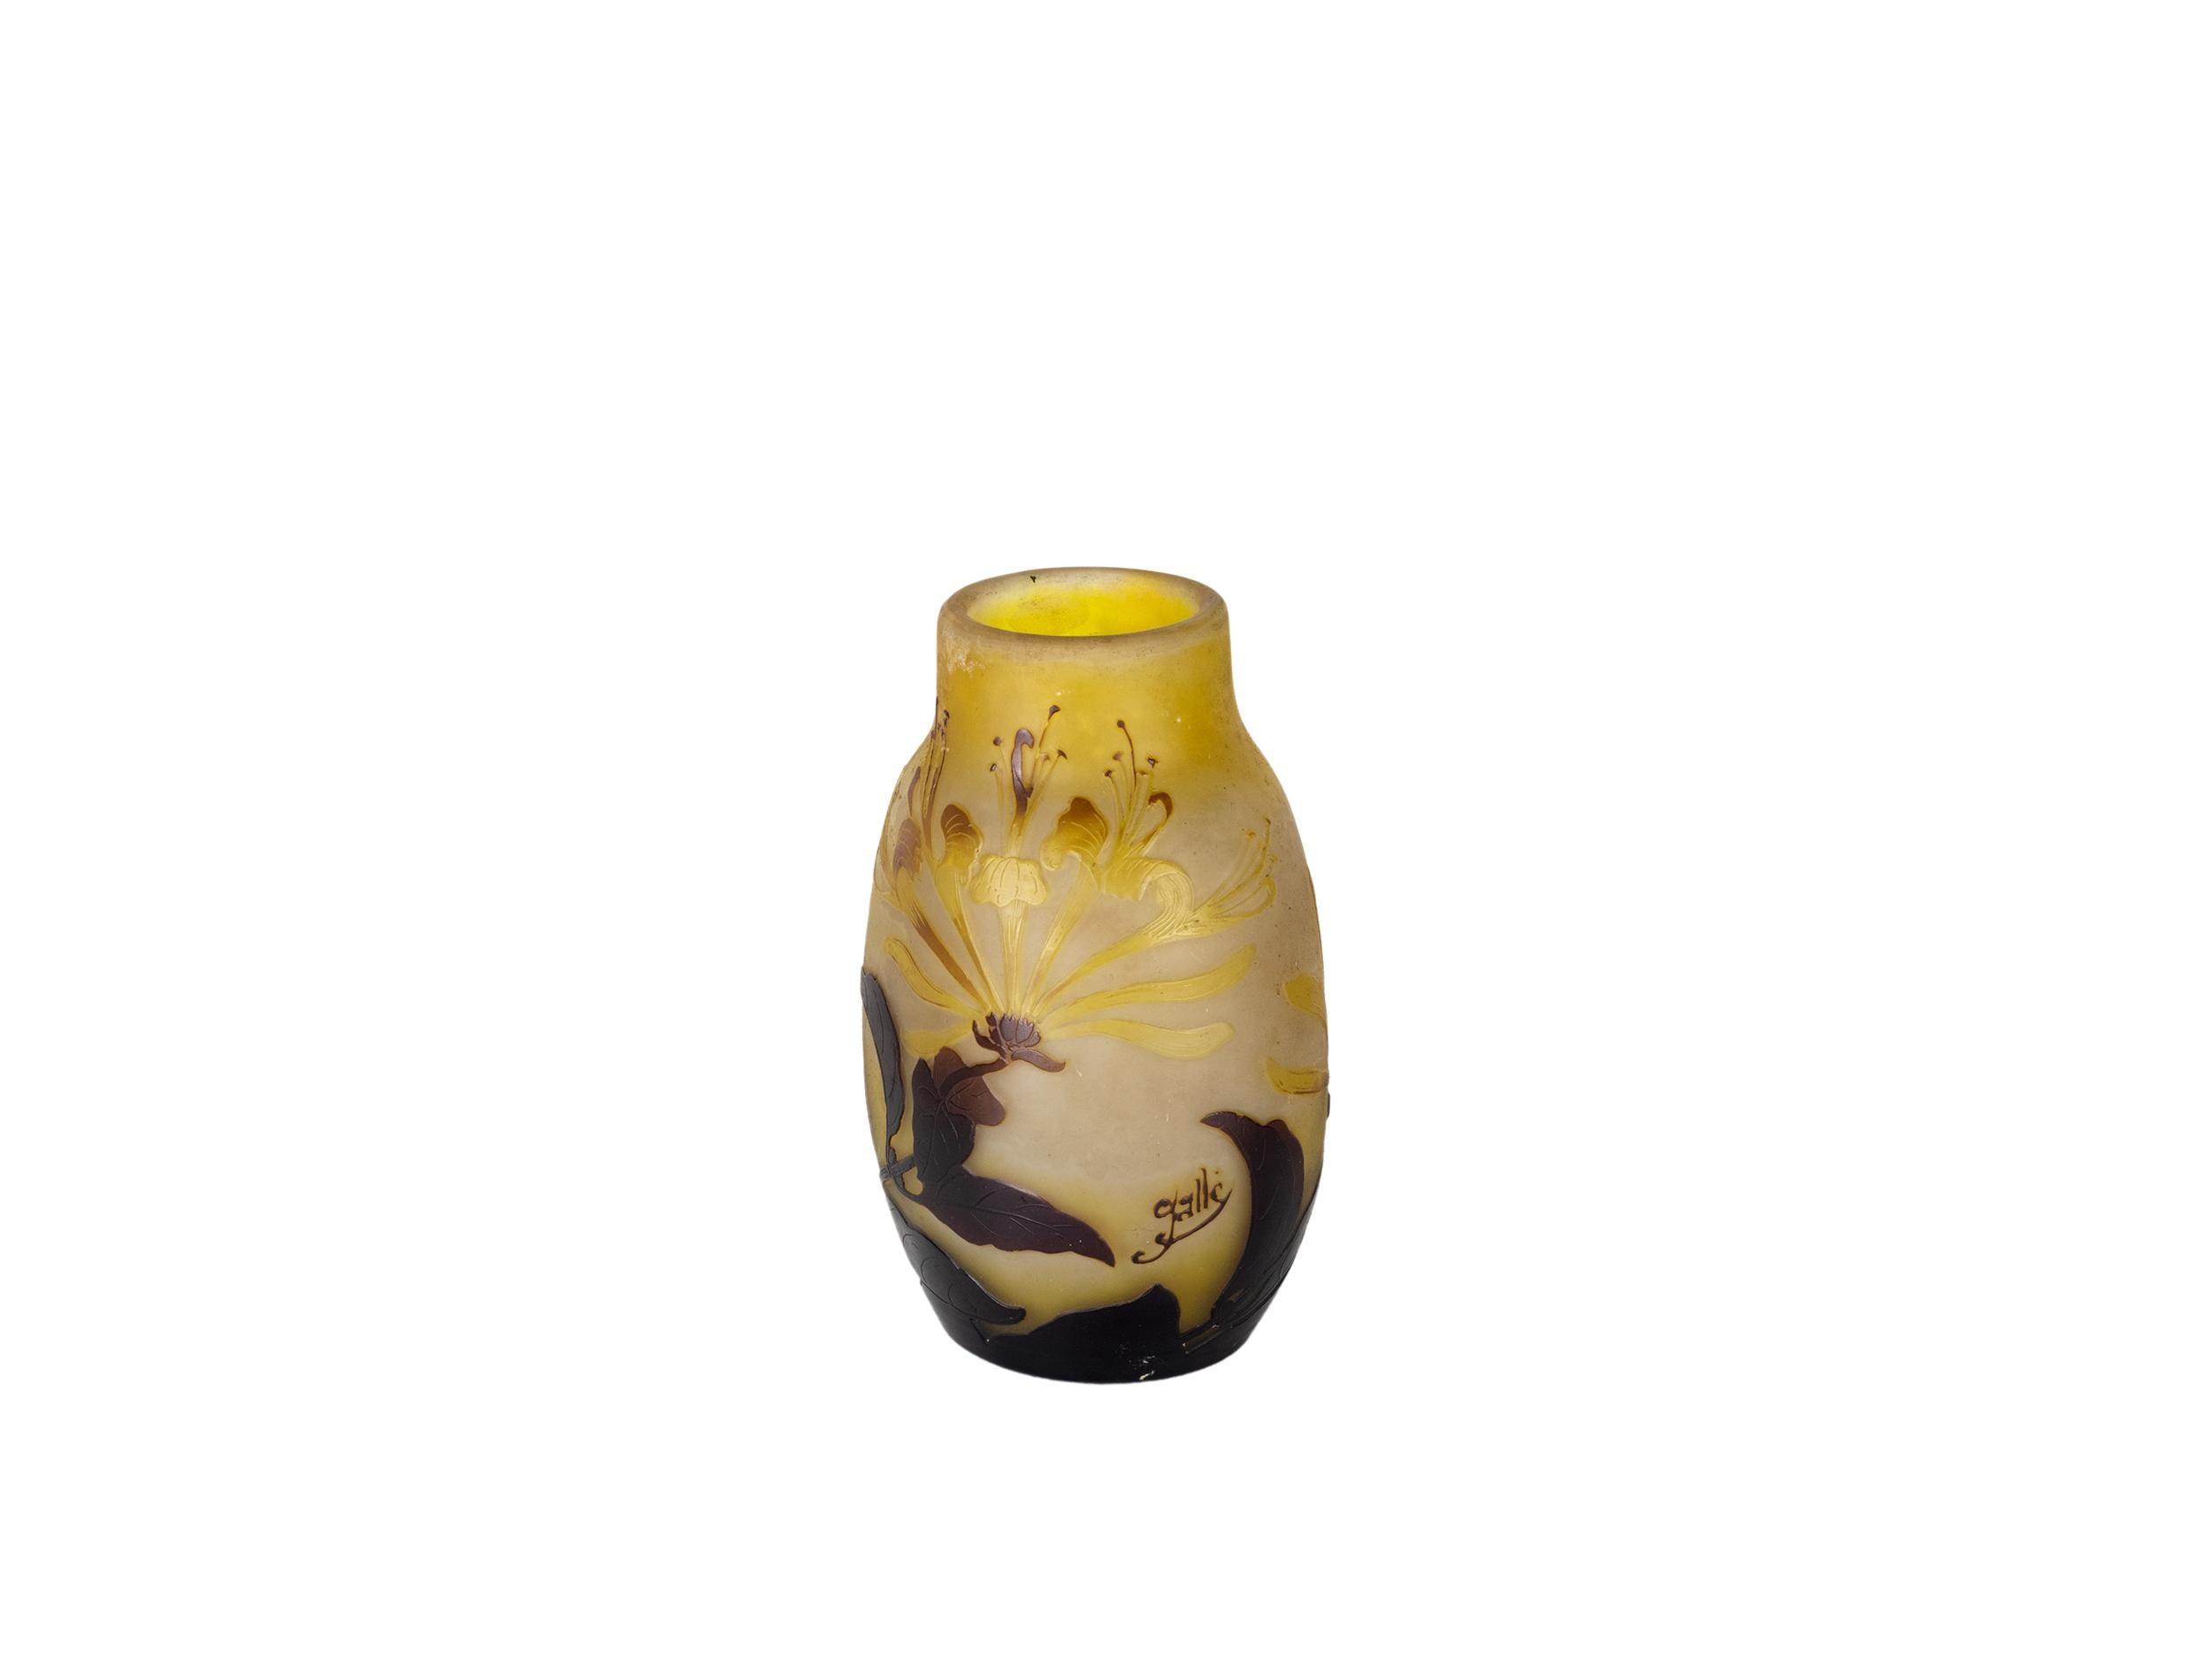 Impressive Art Nouveau Emile Galle Cameo landscape vase, in a yellow background and brown inlaid details aquatic vegetation and autumn tonality. 
Represent a magnificent Fuschia Flower in all glory and in perfect light conditions. 
‘Galle’ signed.